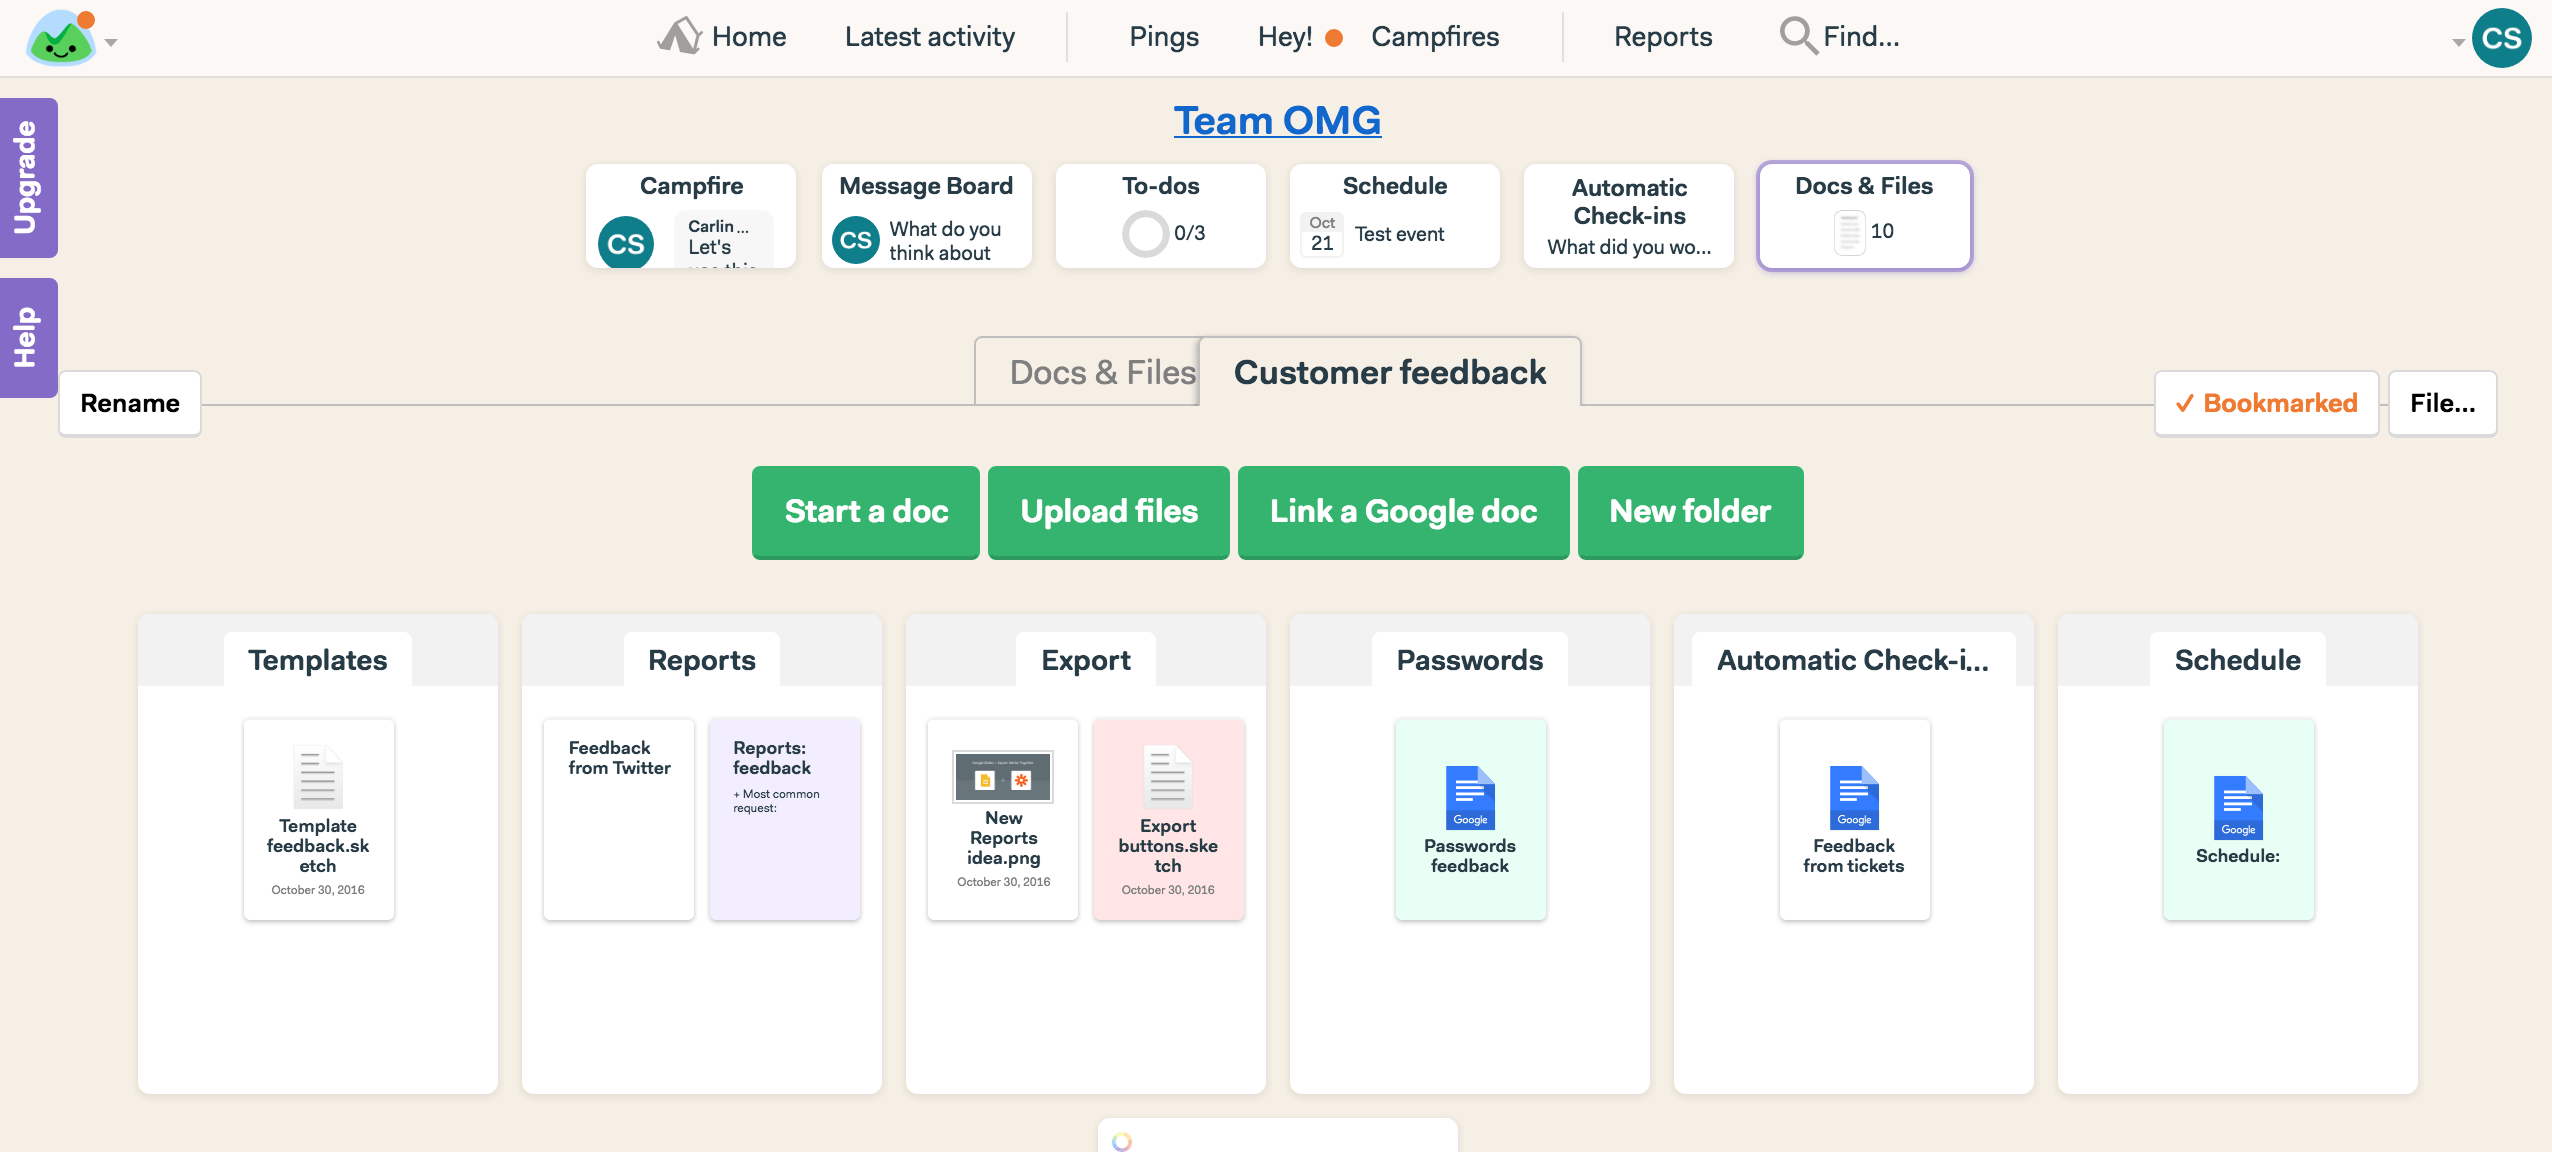 Basecamp interface for managing docs and files in project collaboration